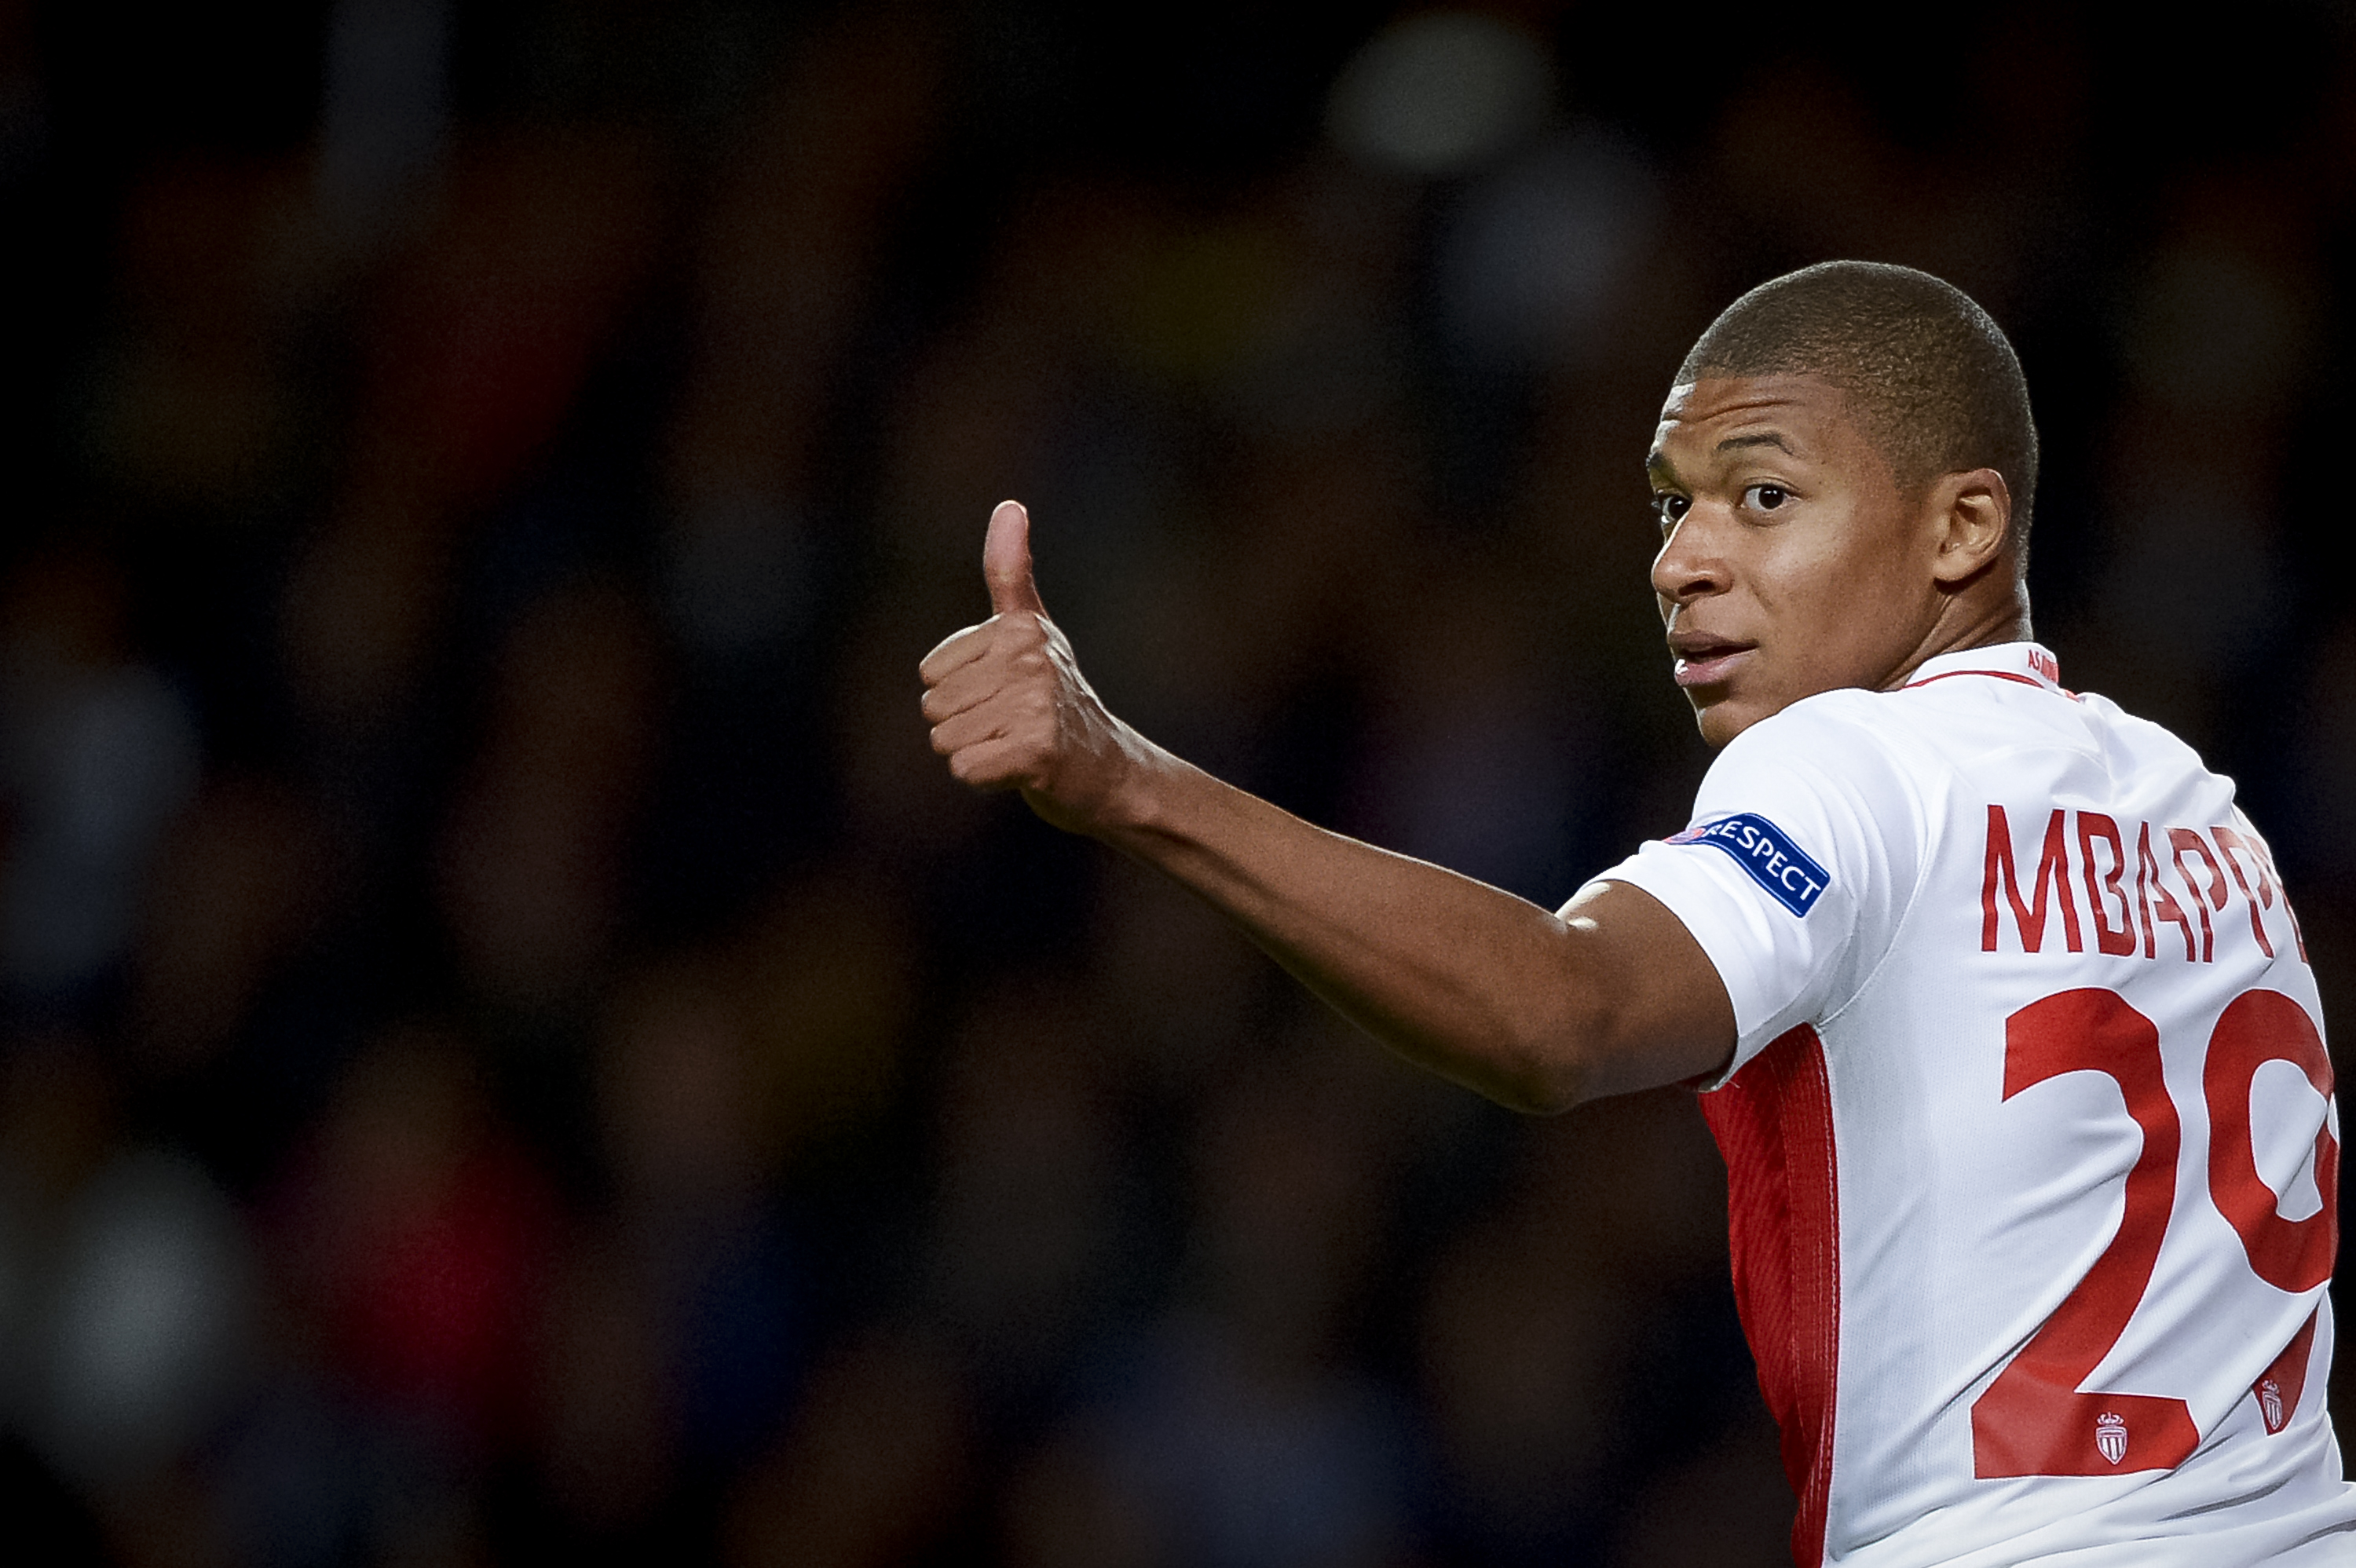 Kylian Mbappe wants to transfer to Real Madrid in the summer